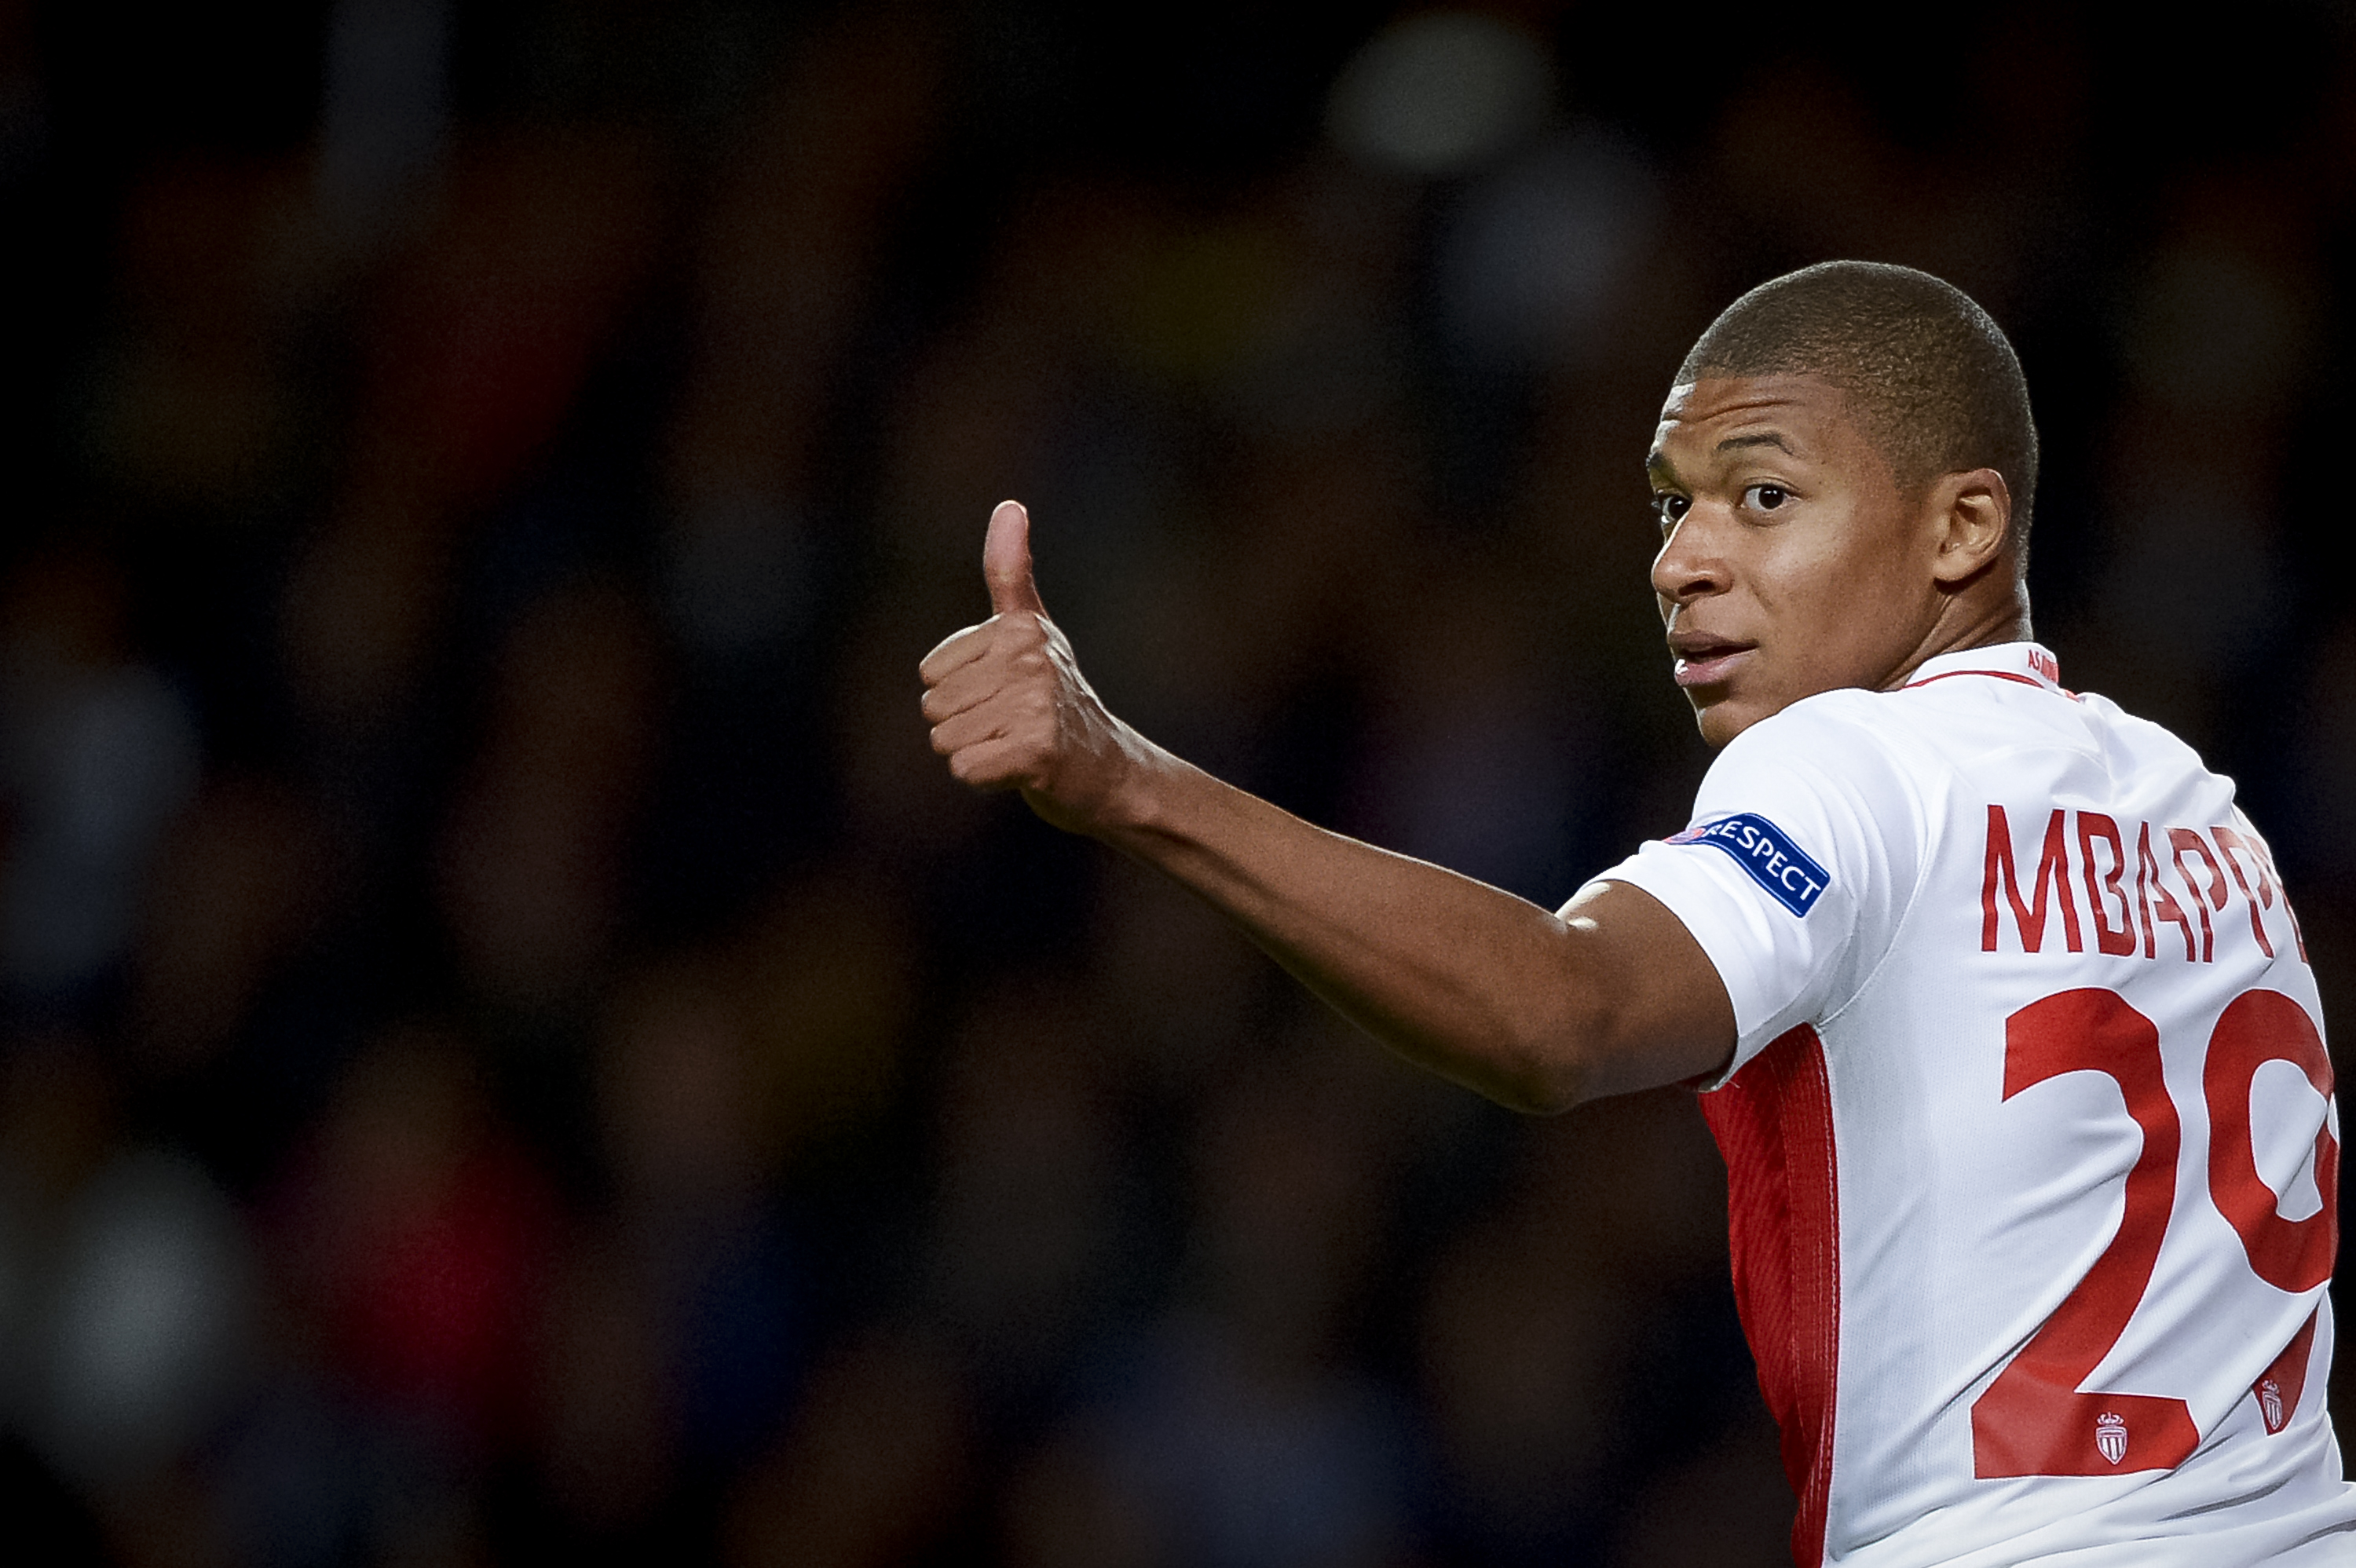 Kylian Mbappe wants to transfer to Real Madrid in the summer